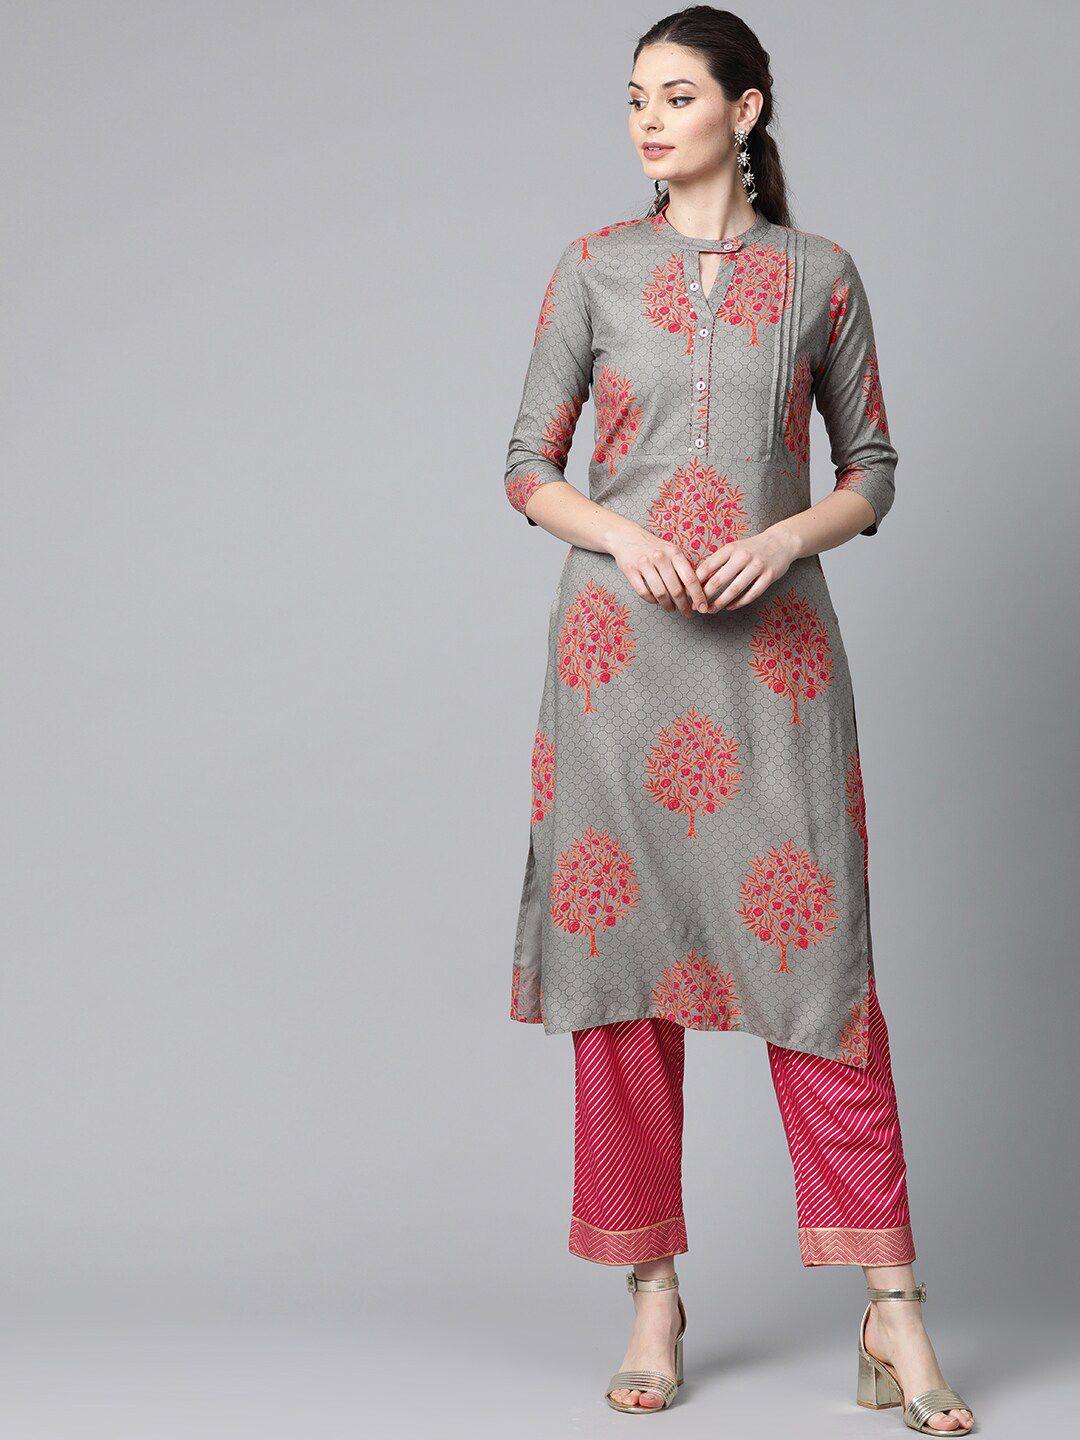 anubhutee women floral printed kurta with trousers